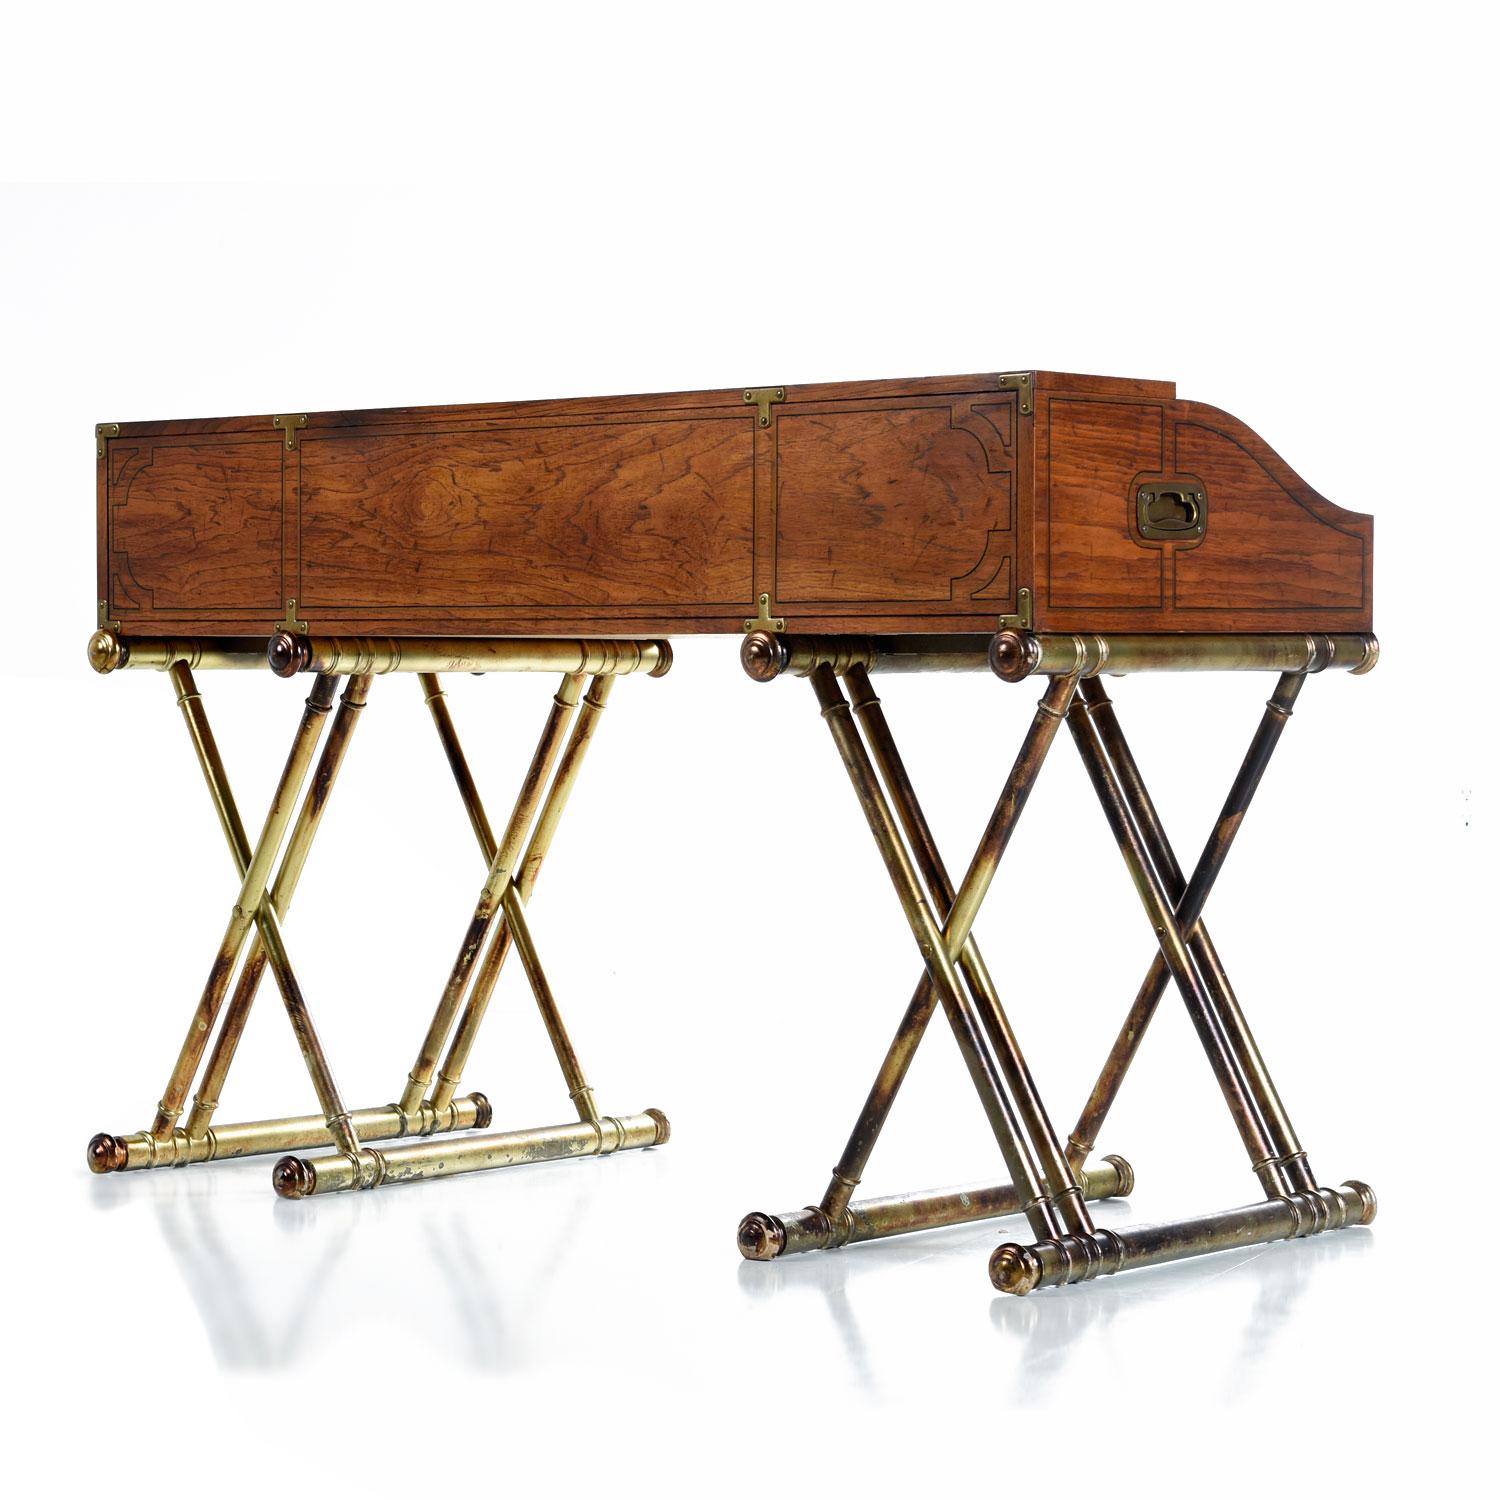 This is not a 19th century British Campaign roll top desk. It's way better. Why? Because it was made in 1970s in America by Drexel with all the bizarre, stately flamboyance and none of the pesky practicality that real Campaign furniture comes with.